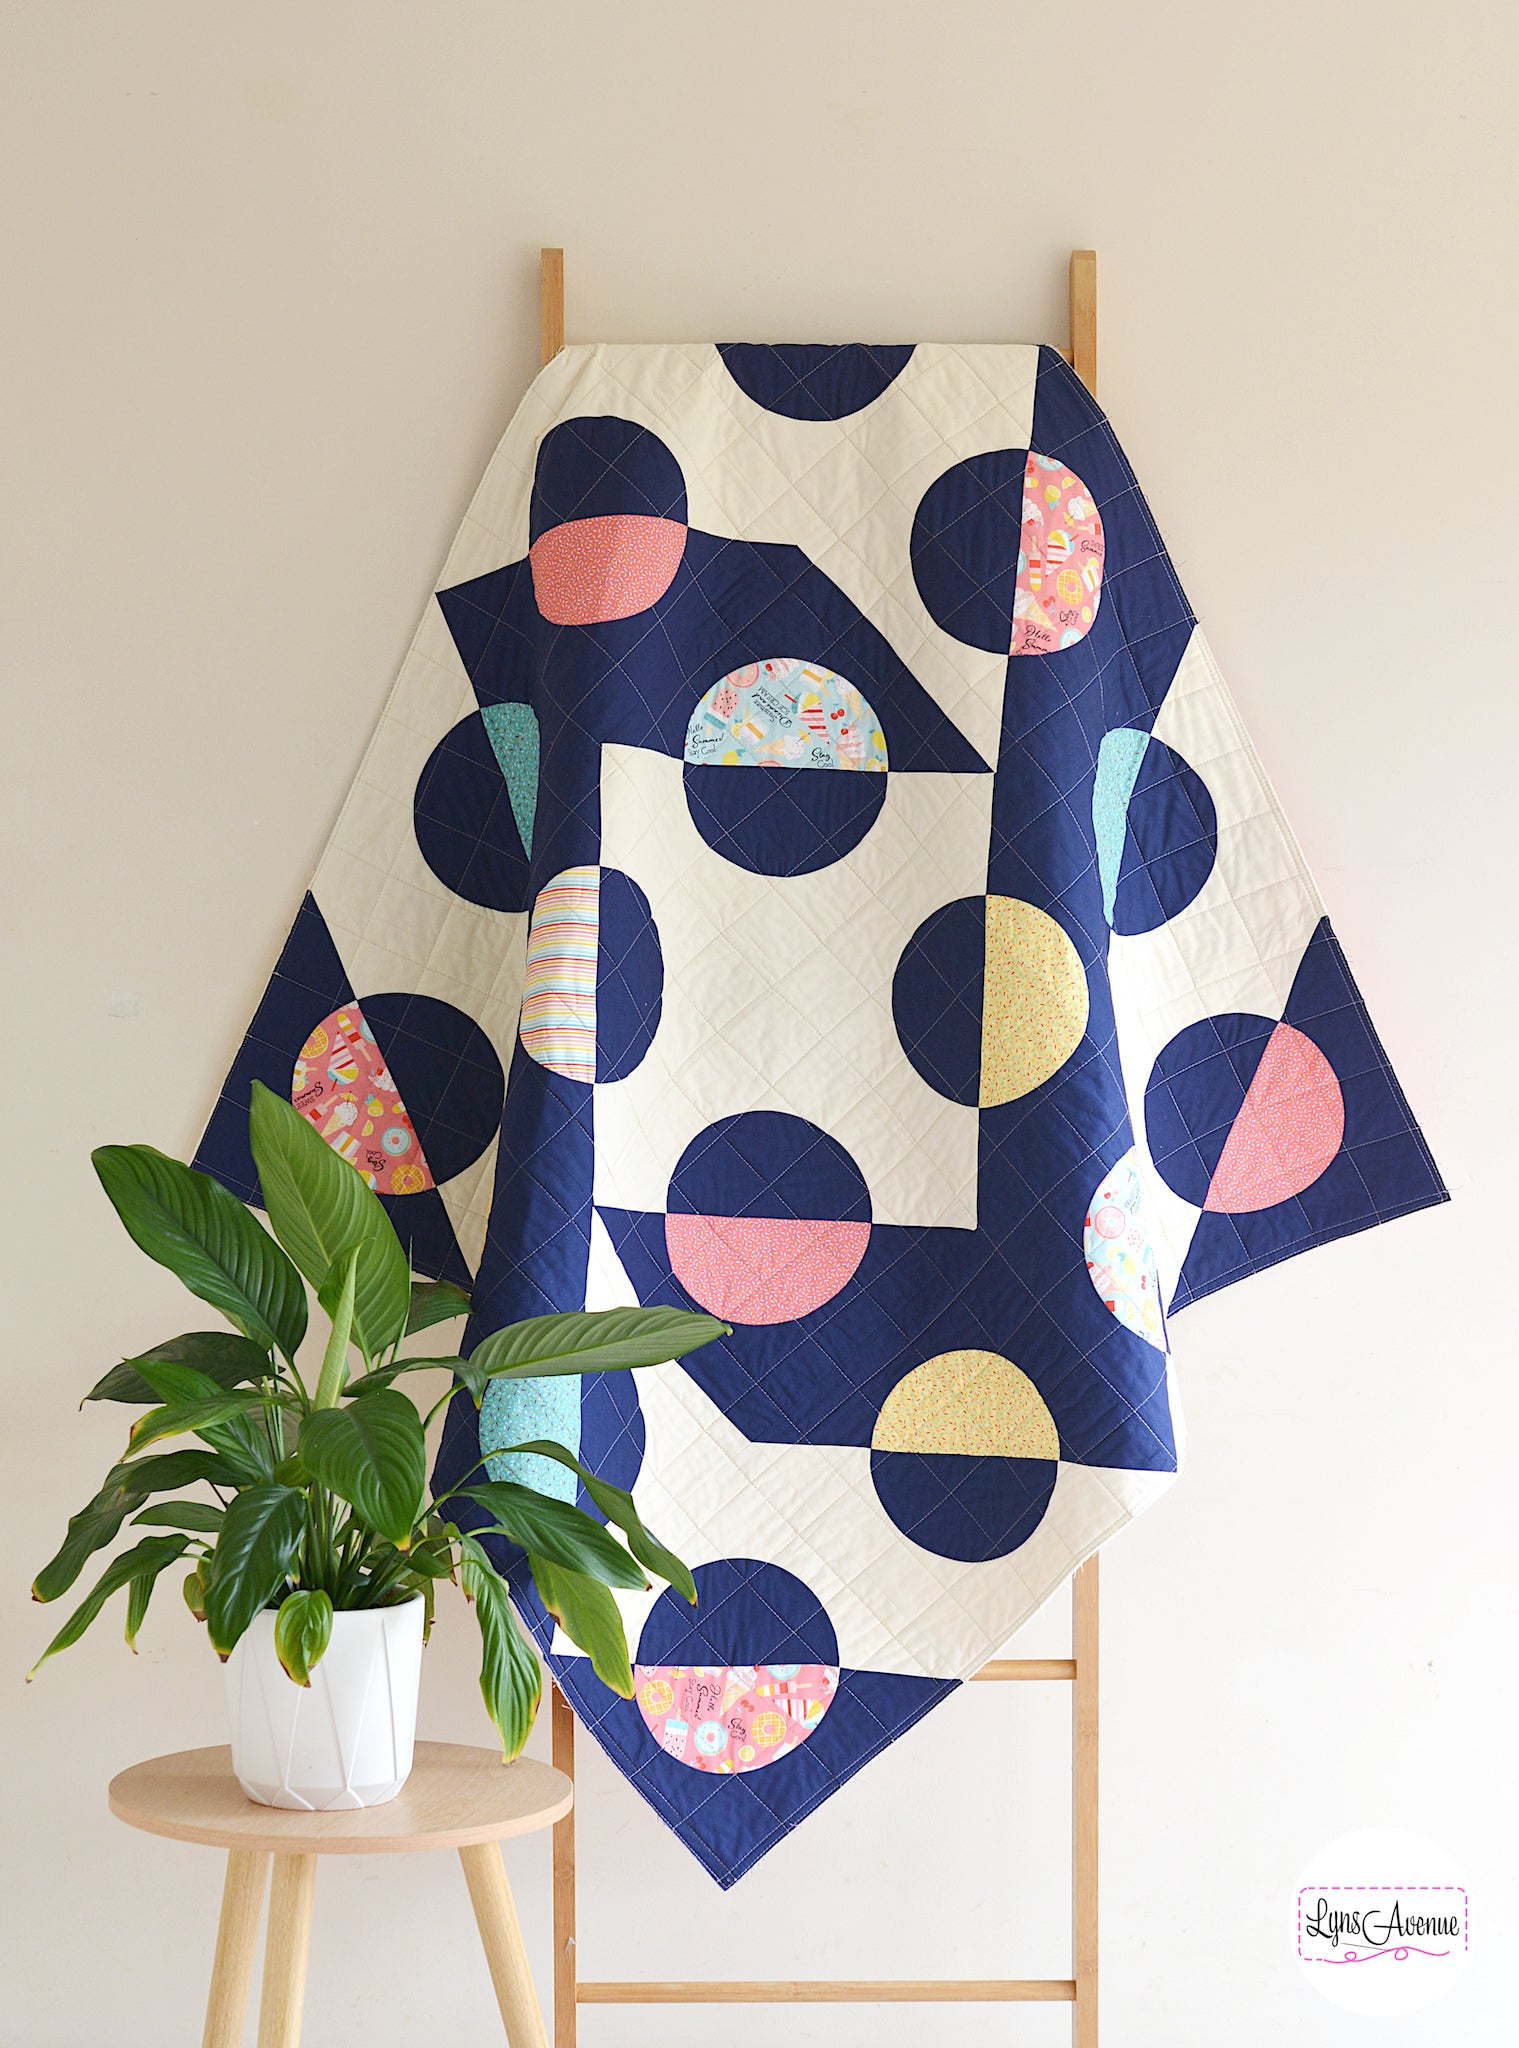 Hook and Pop quilt in navy blue and cream background with pops of colour in yellow, pink, green fabrics with sprinkles and ice cream designs on a quilt ladder